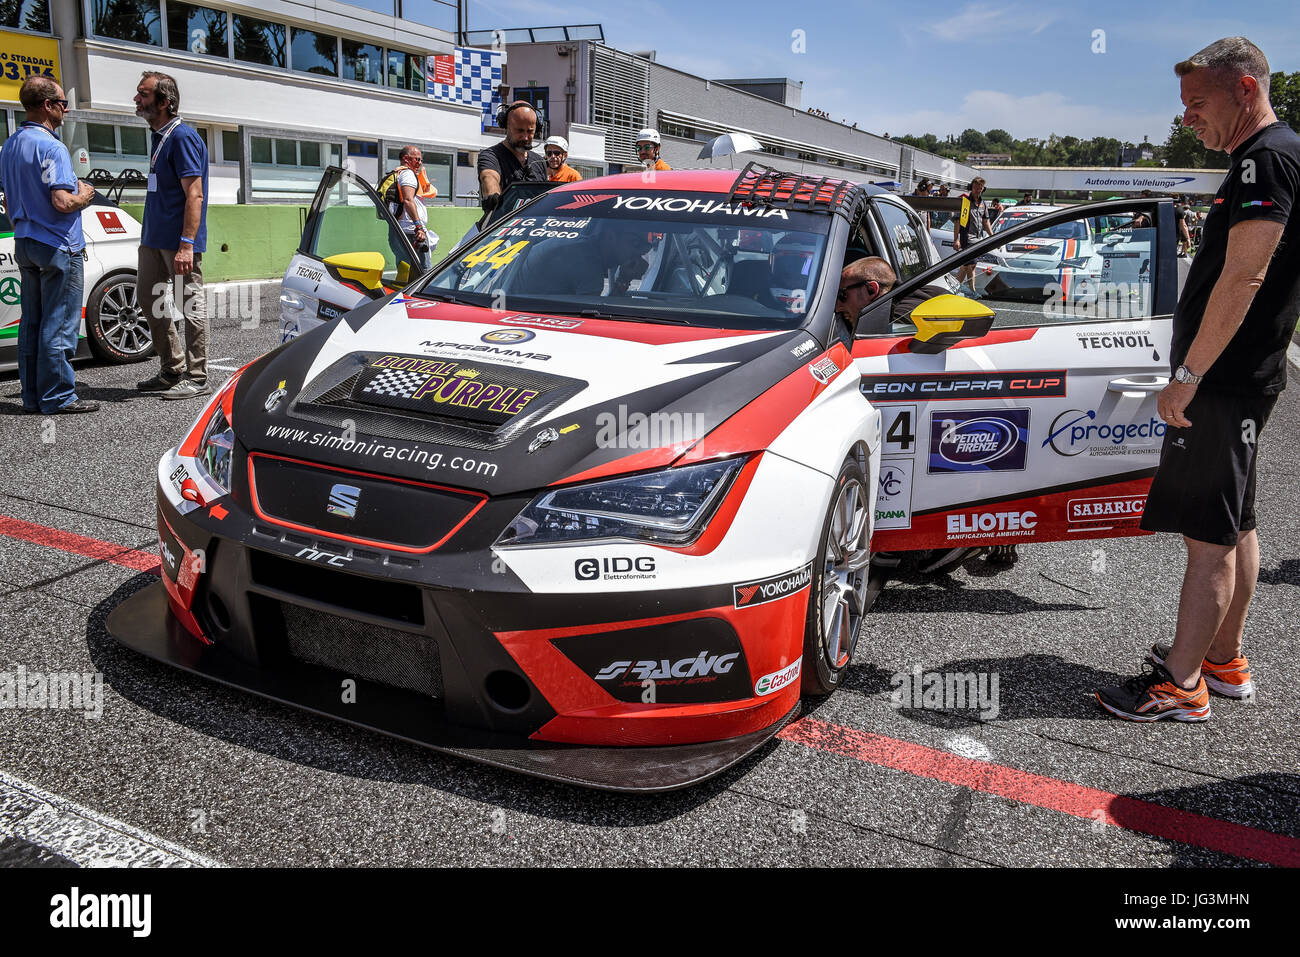 Seat Leon Cupra Cup racing, drivers Gabriele Torelli and Matteo Greco car, on circuit starting grid line up bef Stock Photo